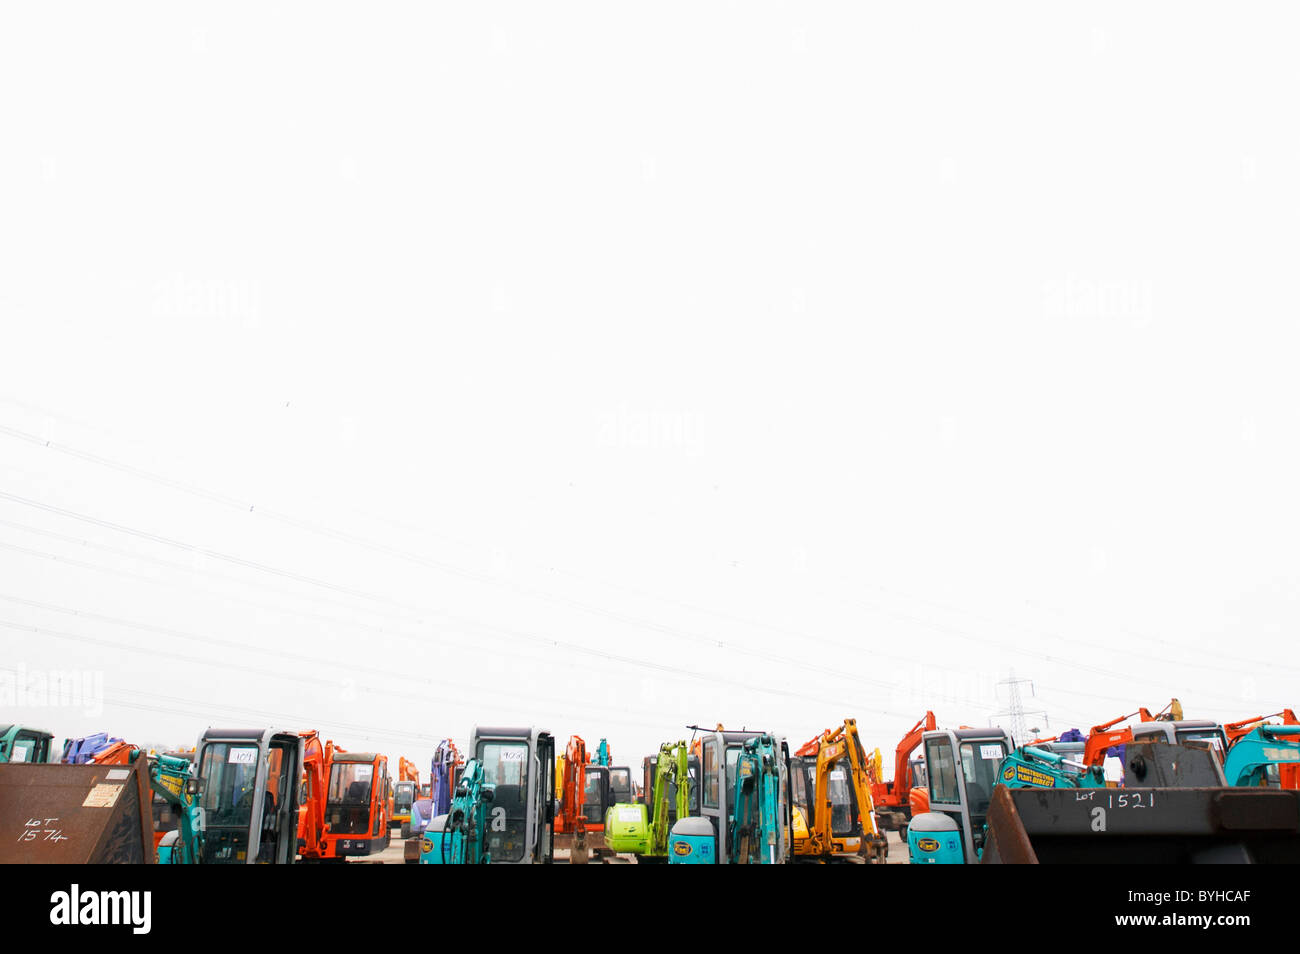 Mini-diggers lined up on a yard Stock Photo